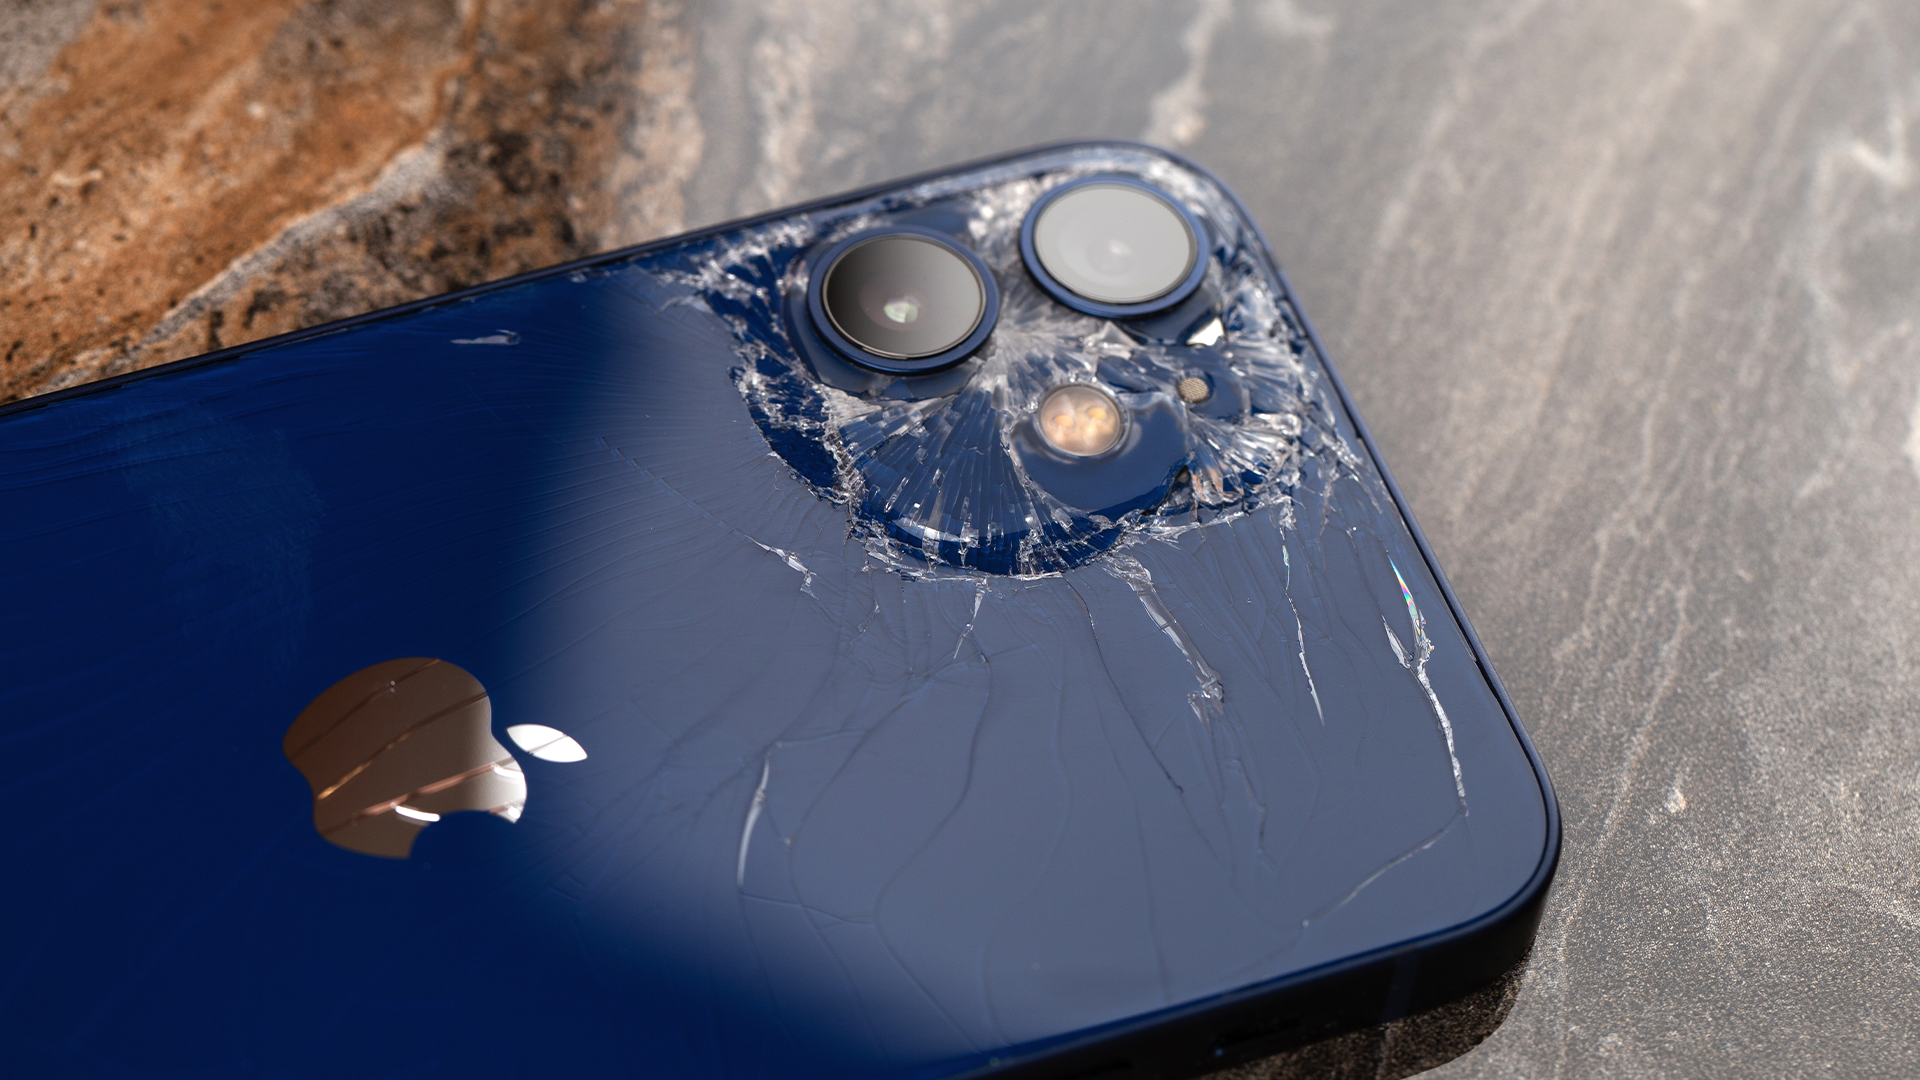 An iPhone with broken back glass.